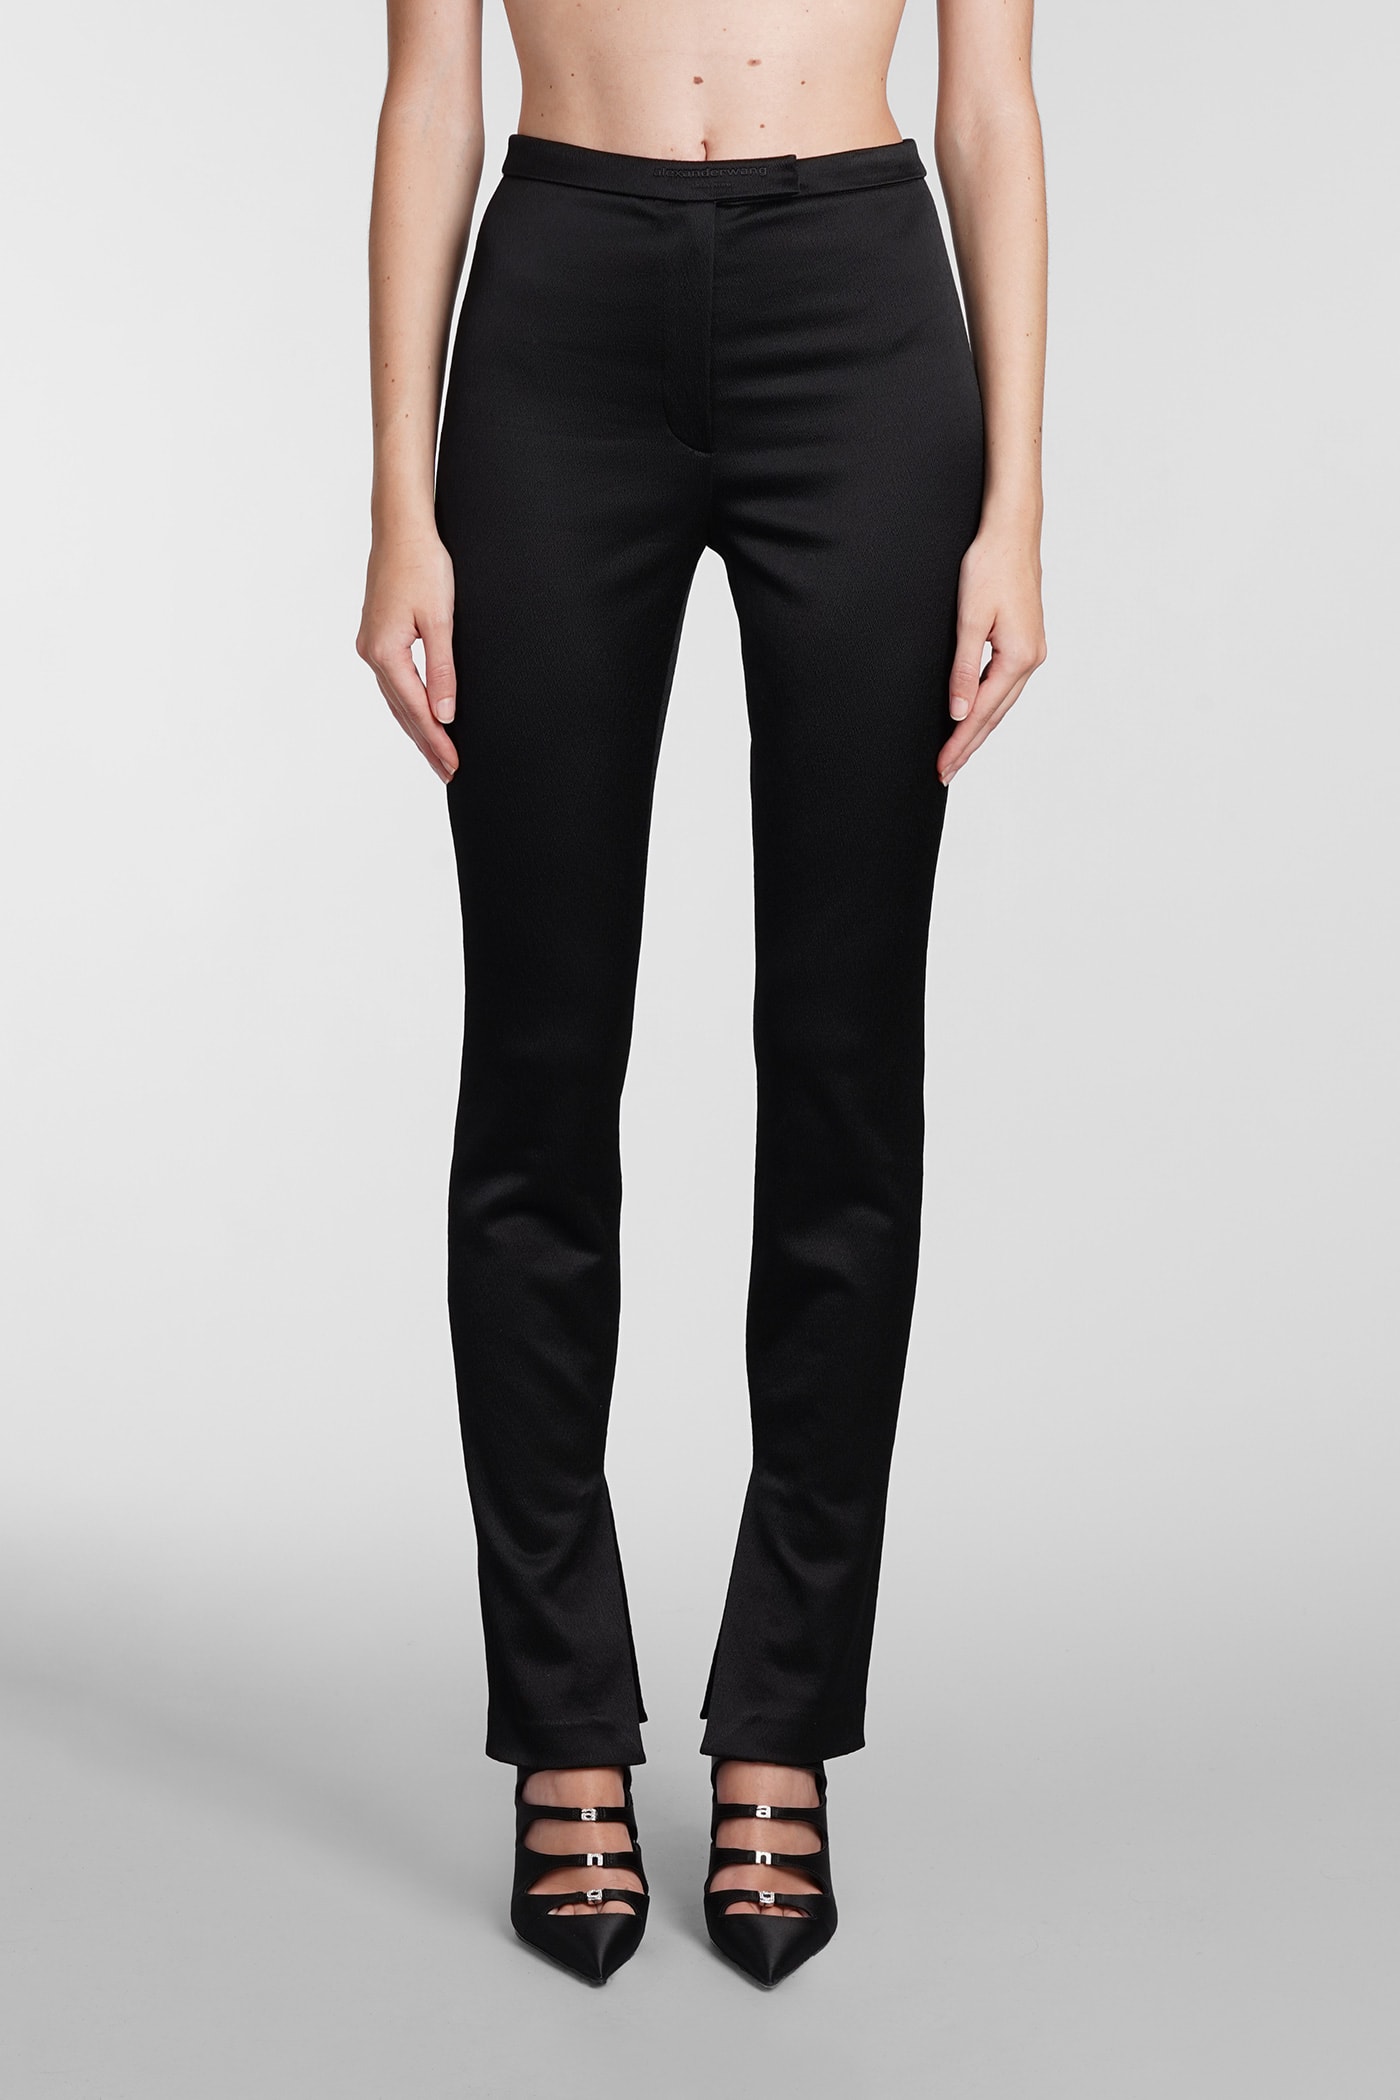 ALEXANDER WANG trousers IN BLACK COTTON